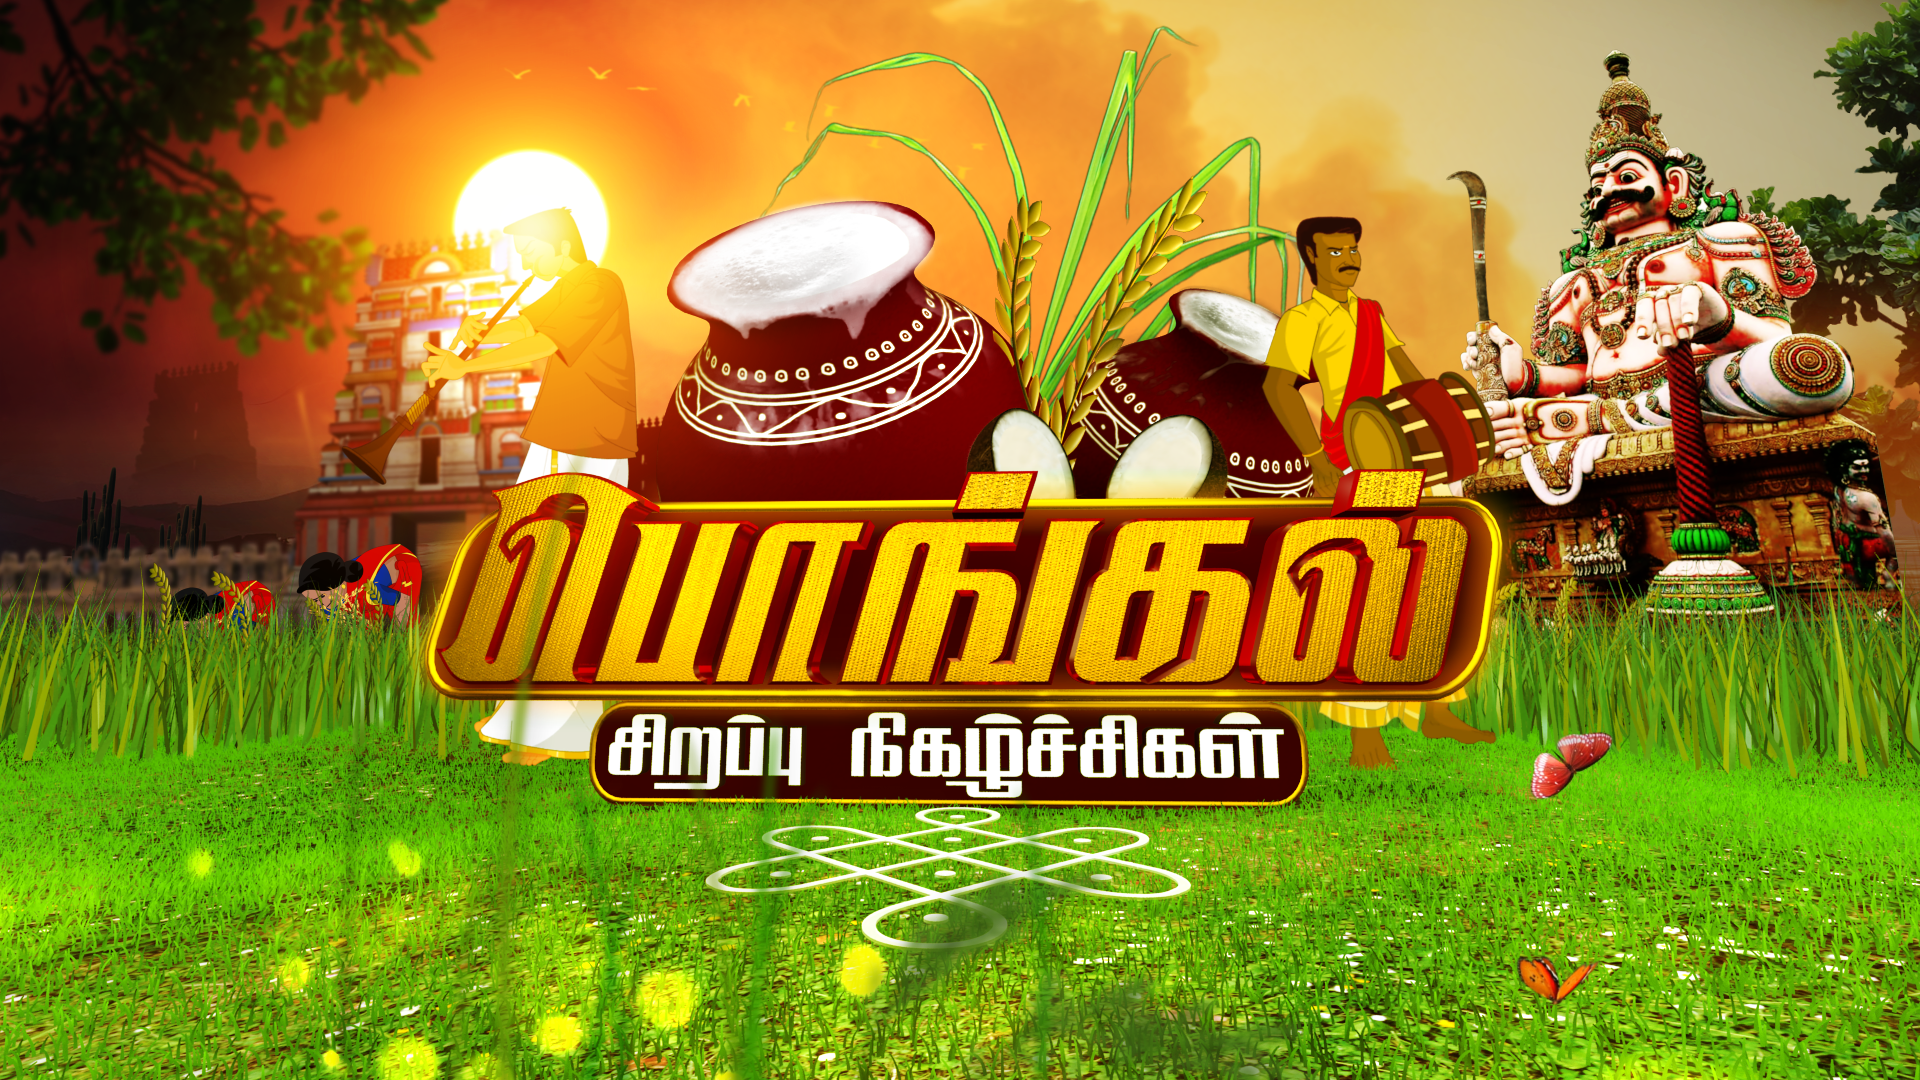 Pongal celebration picture wallpapers tamil festivals